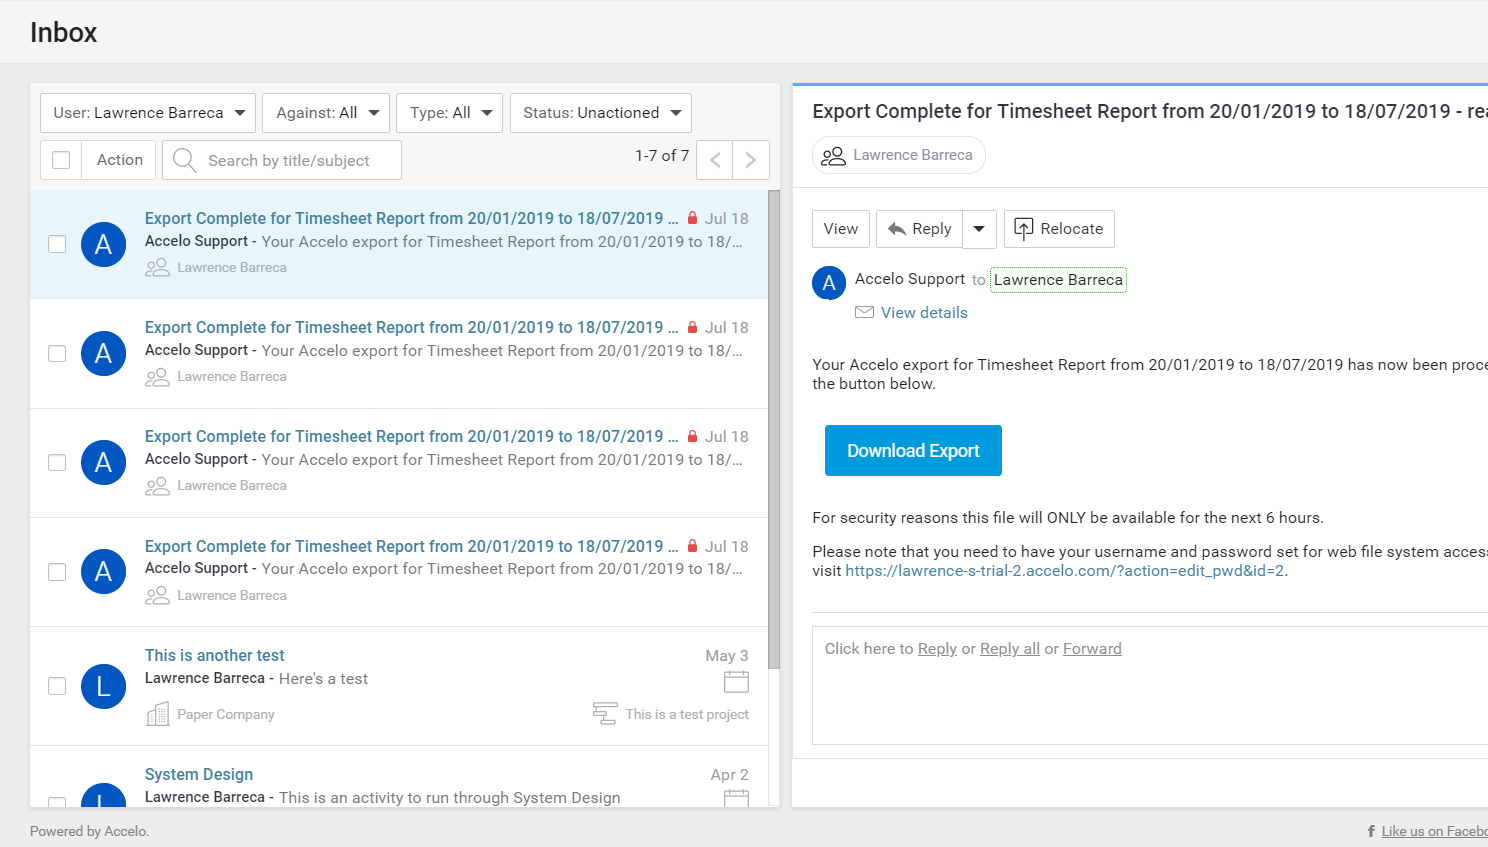 Accelo's project collaboration software for sharing a unified inbox